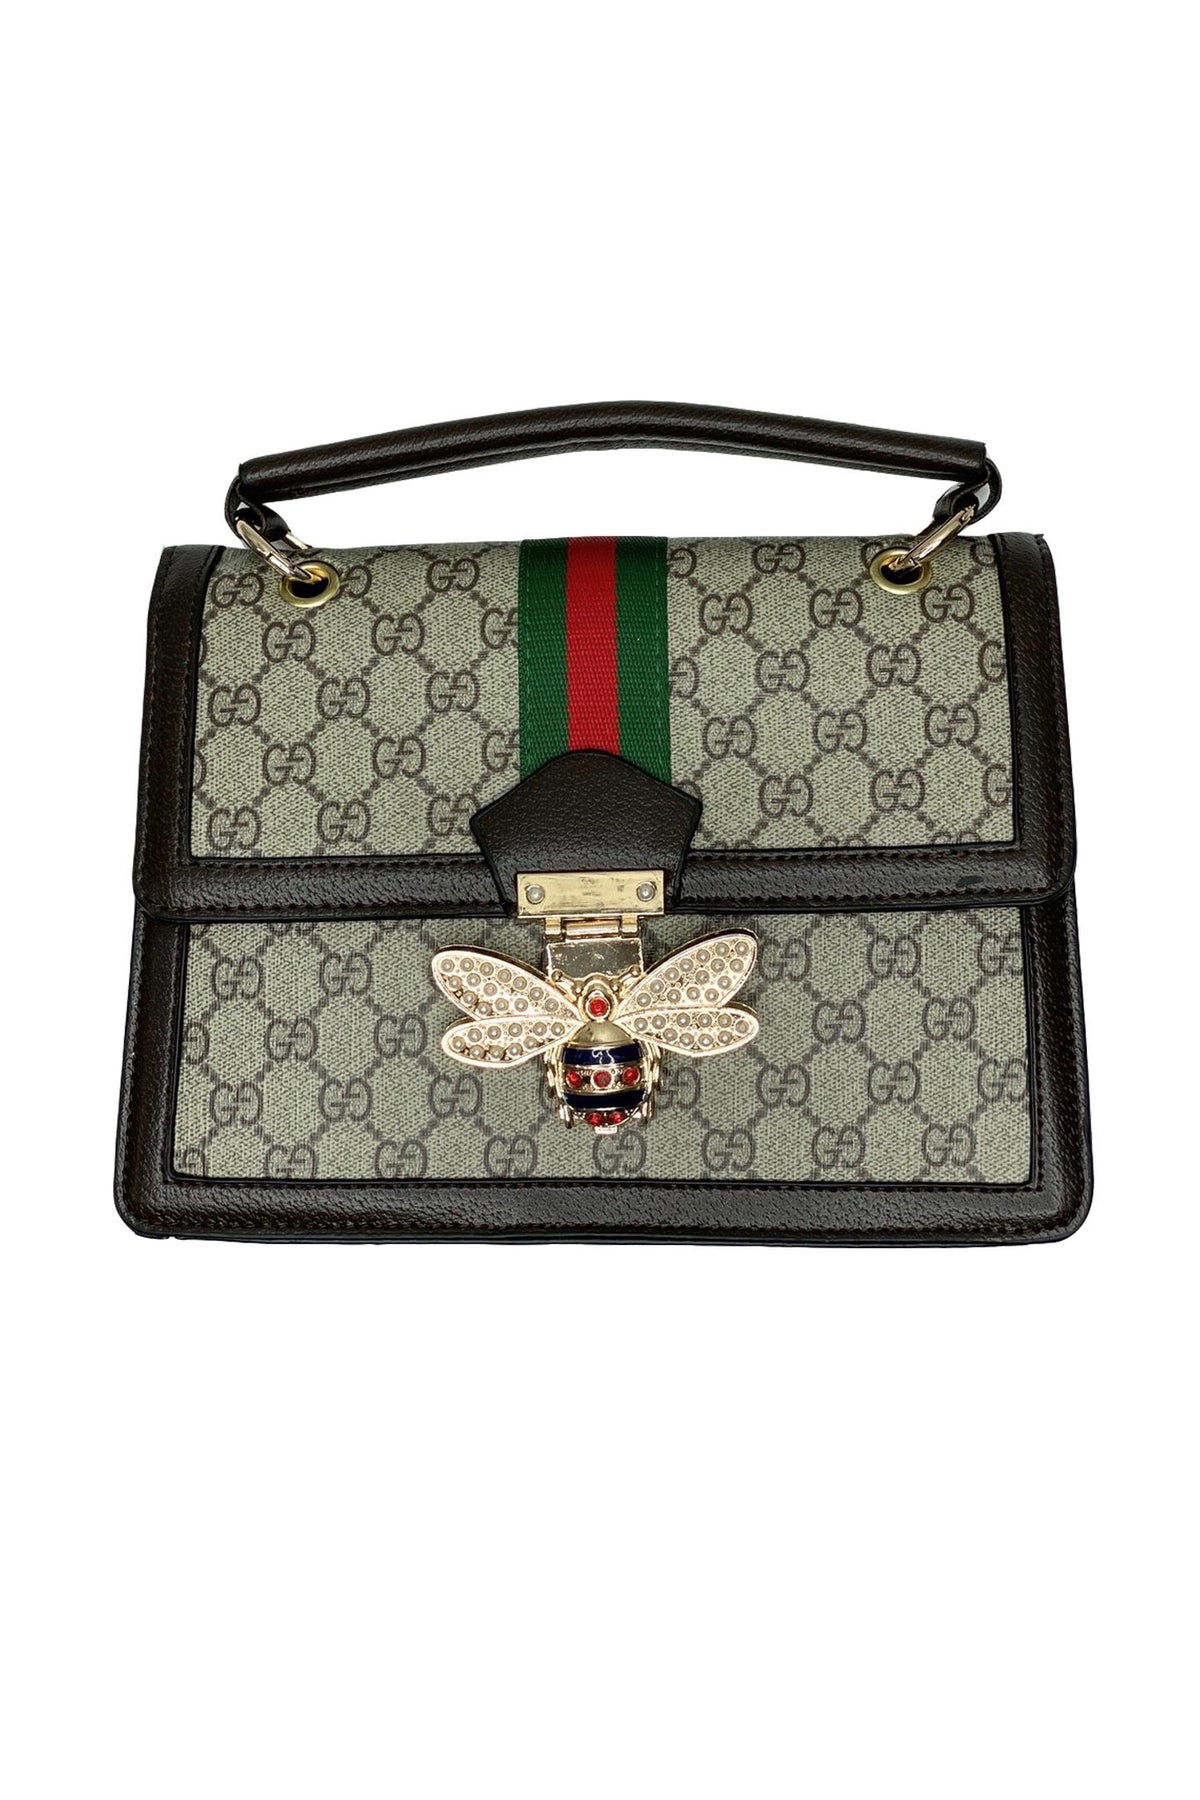 gucci purse with a bee